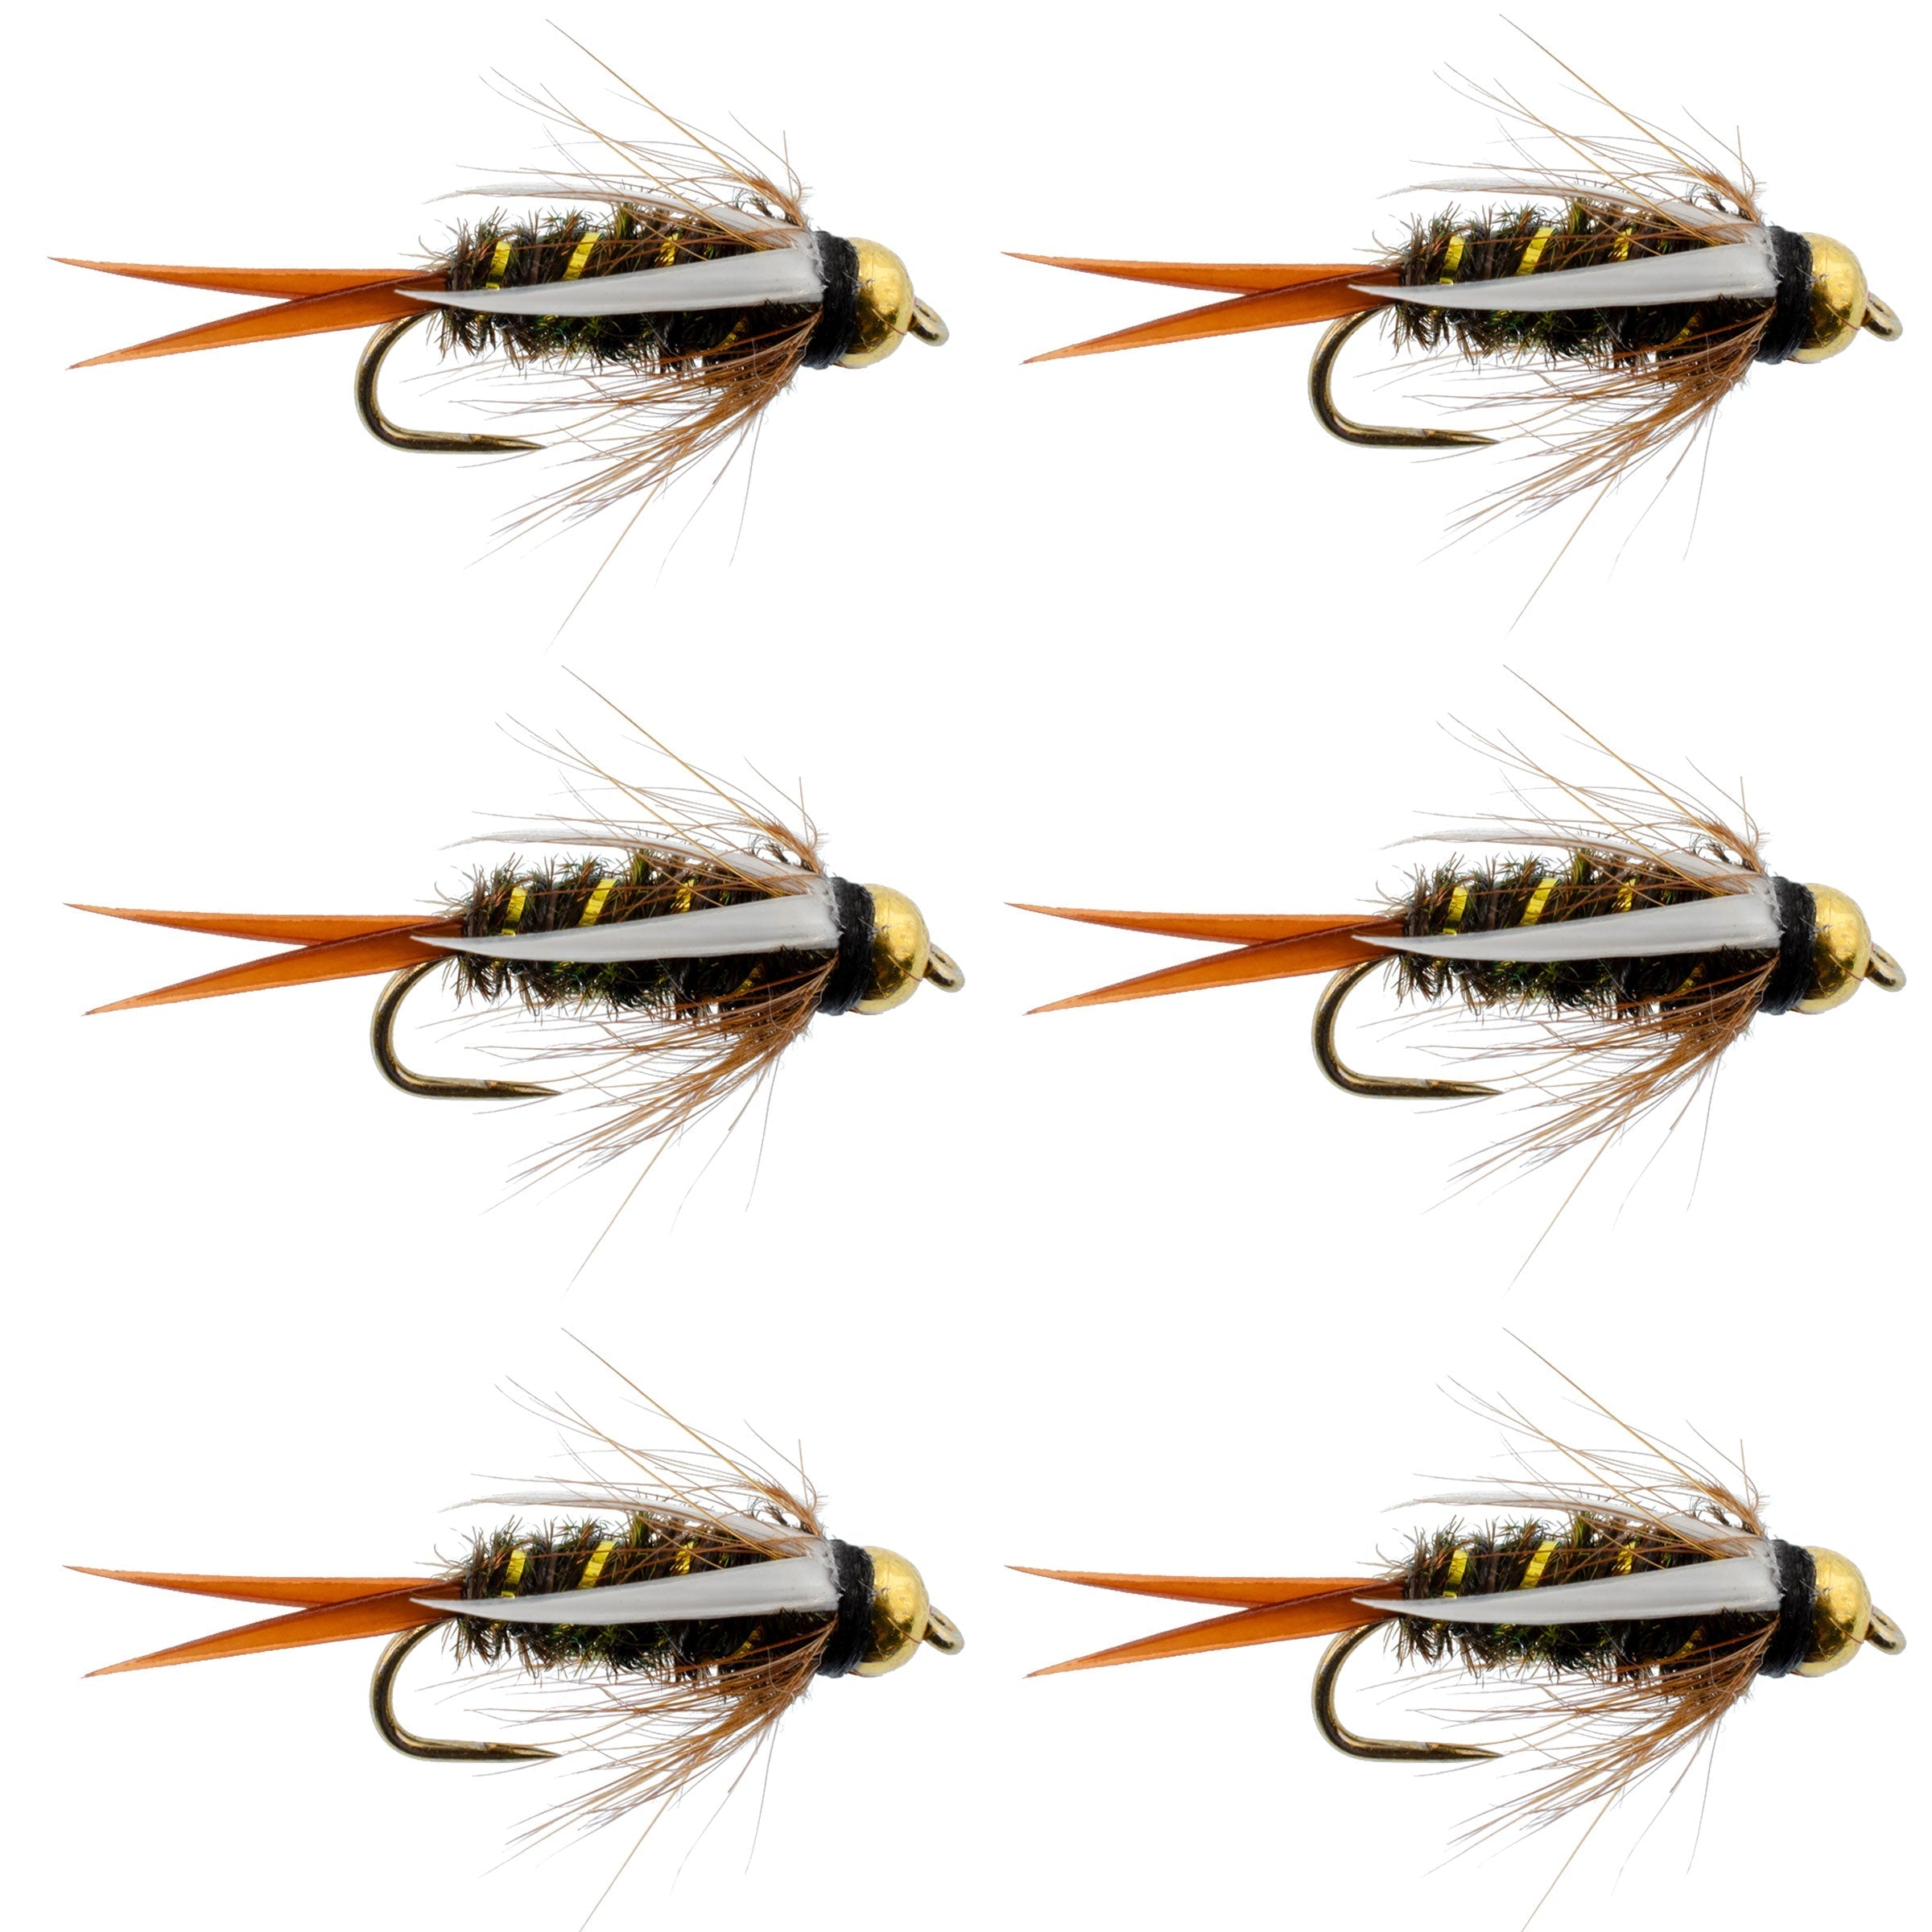 Barbless Bead Head Prince Nymph Fly Fishing Flies - Set of 6 Flies Hook Size 16